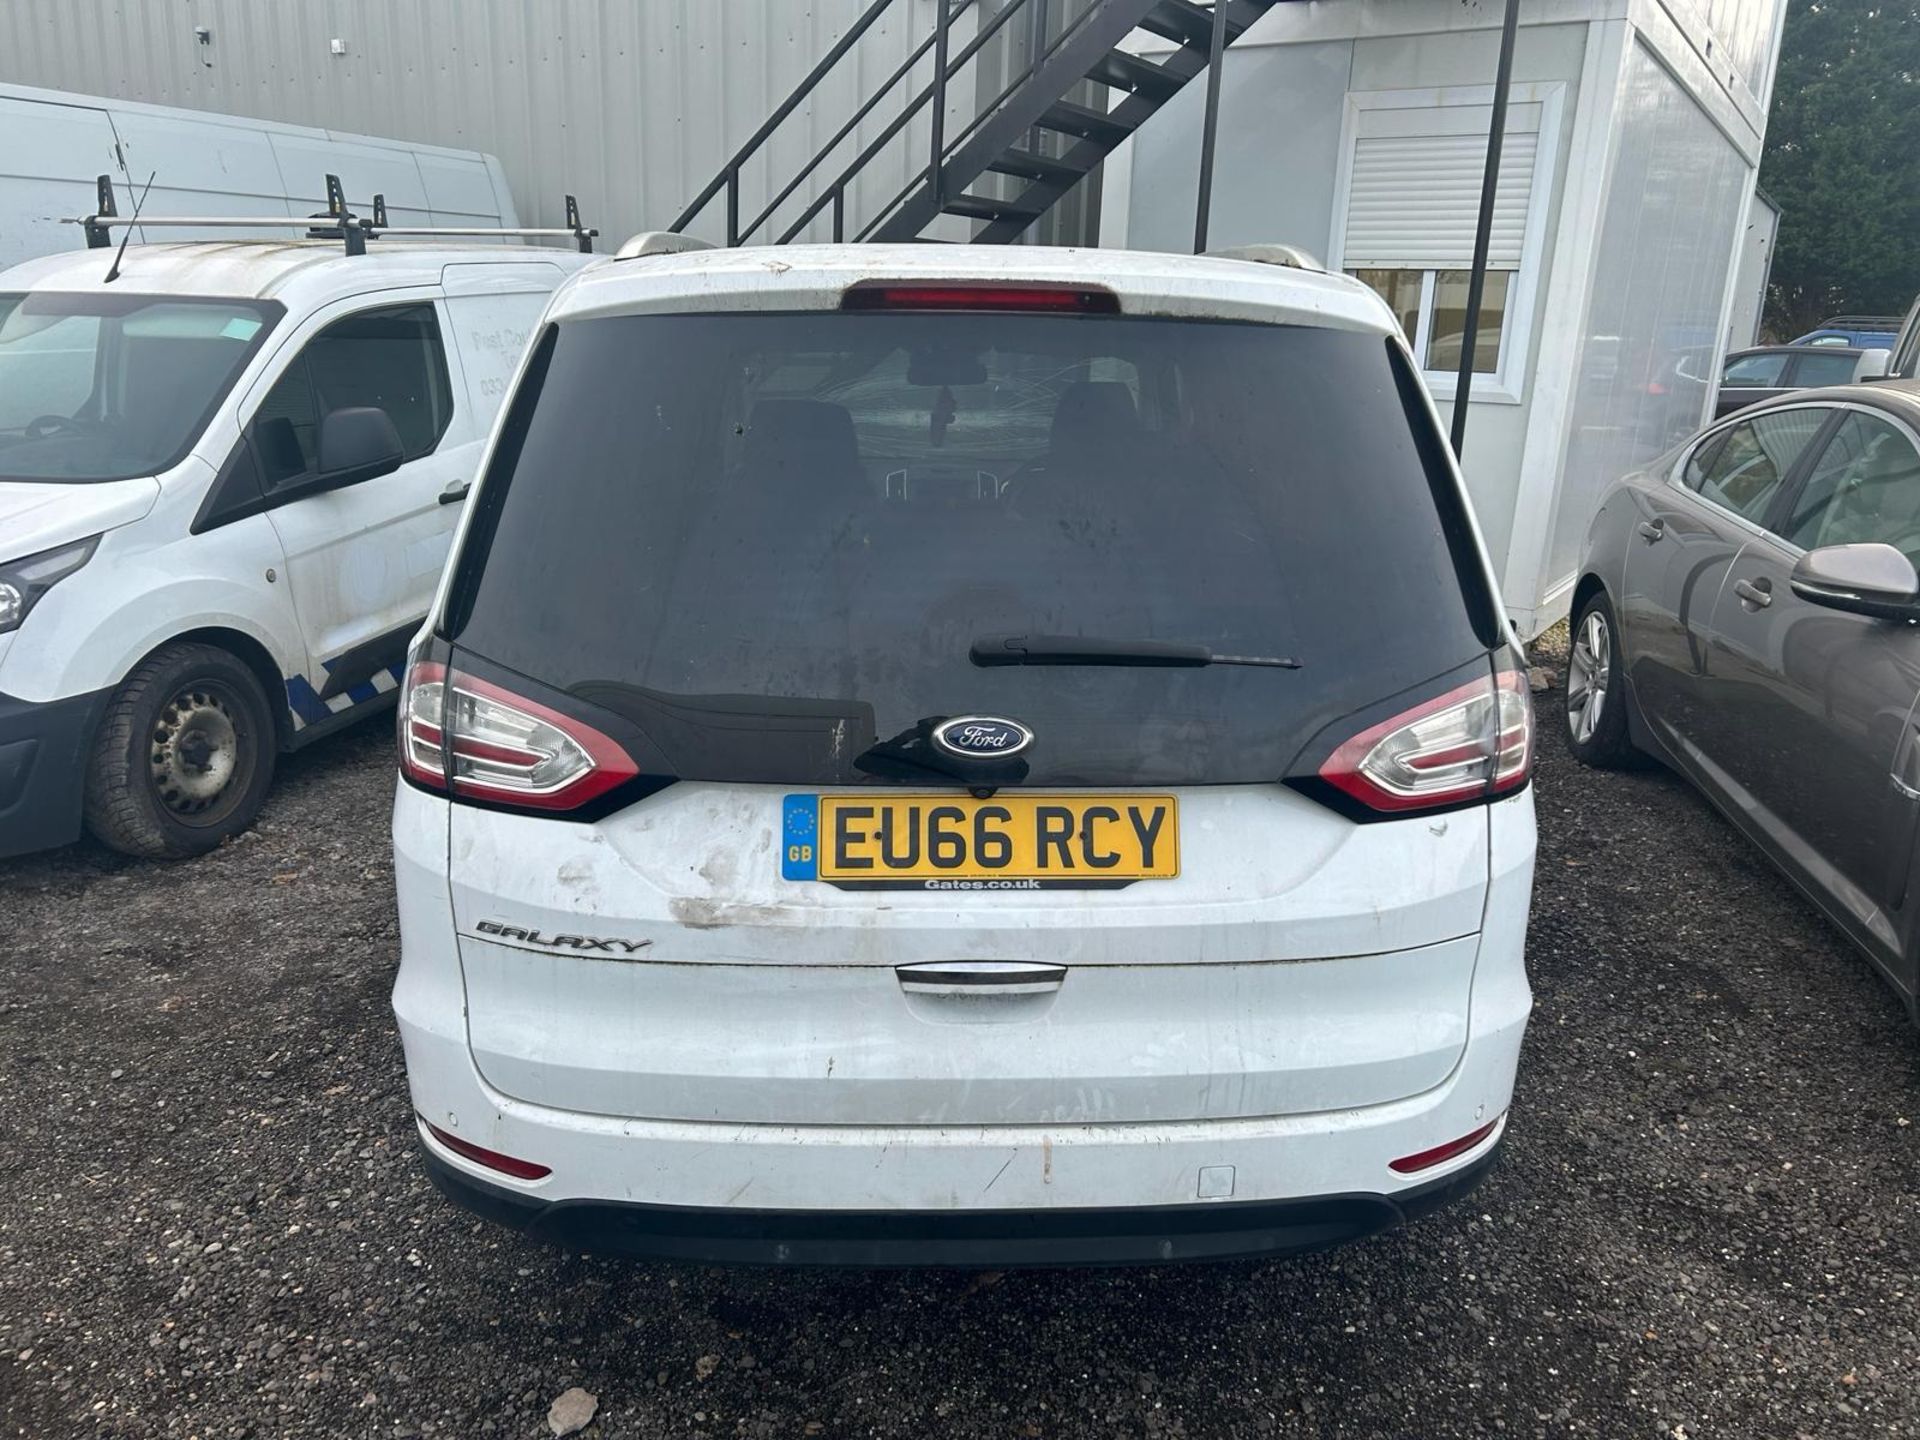 2016 66 FORD GALAXY TITANIUM X MPV - 136K MILES 8 SERVICE STAMPS - NON RUNNER SNAPPED CAMBELT - Image 4 of 9